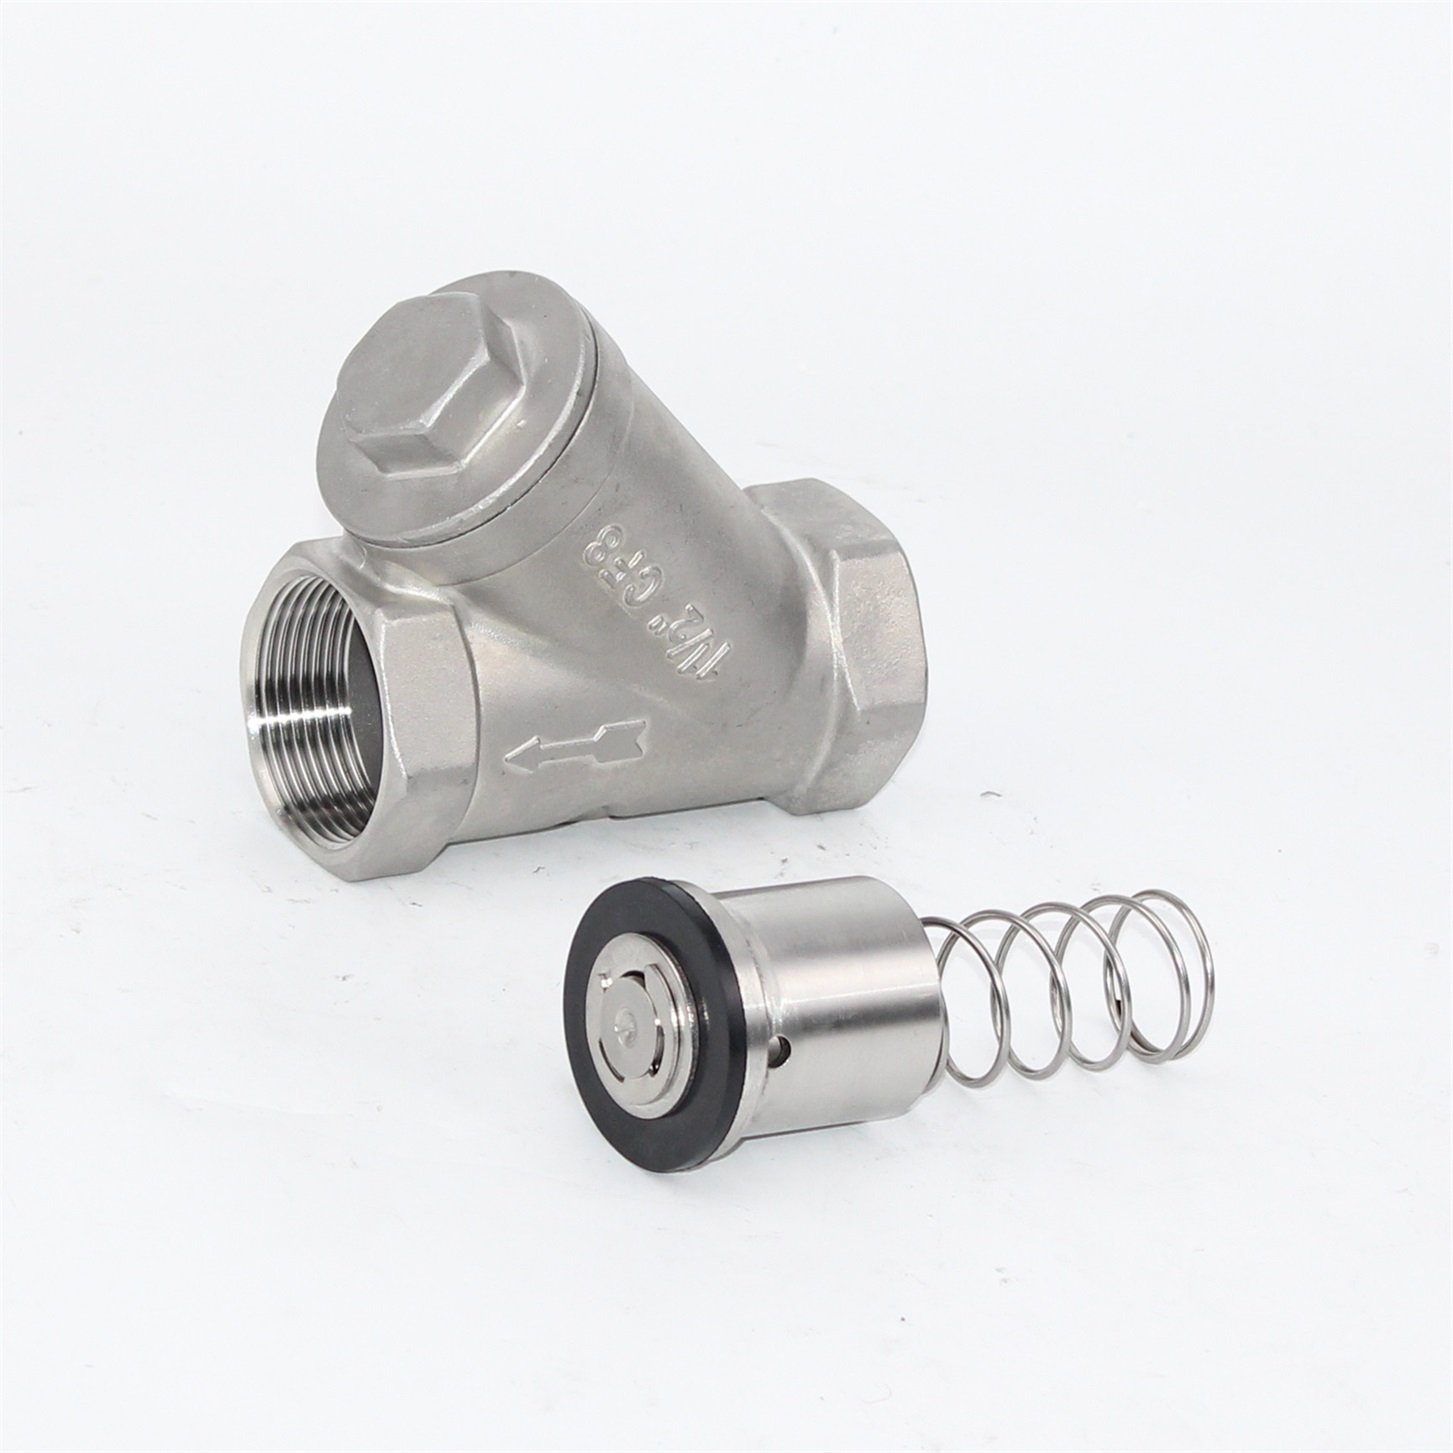 DINGGUANGHE Stainless Steel Wire Mouth Horizontal Non-Return Valve 304 Stainless Steel Female Thread Swing Check Valve 1/2 3/4 1 1-1/4 Inch Specification : DN15 